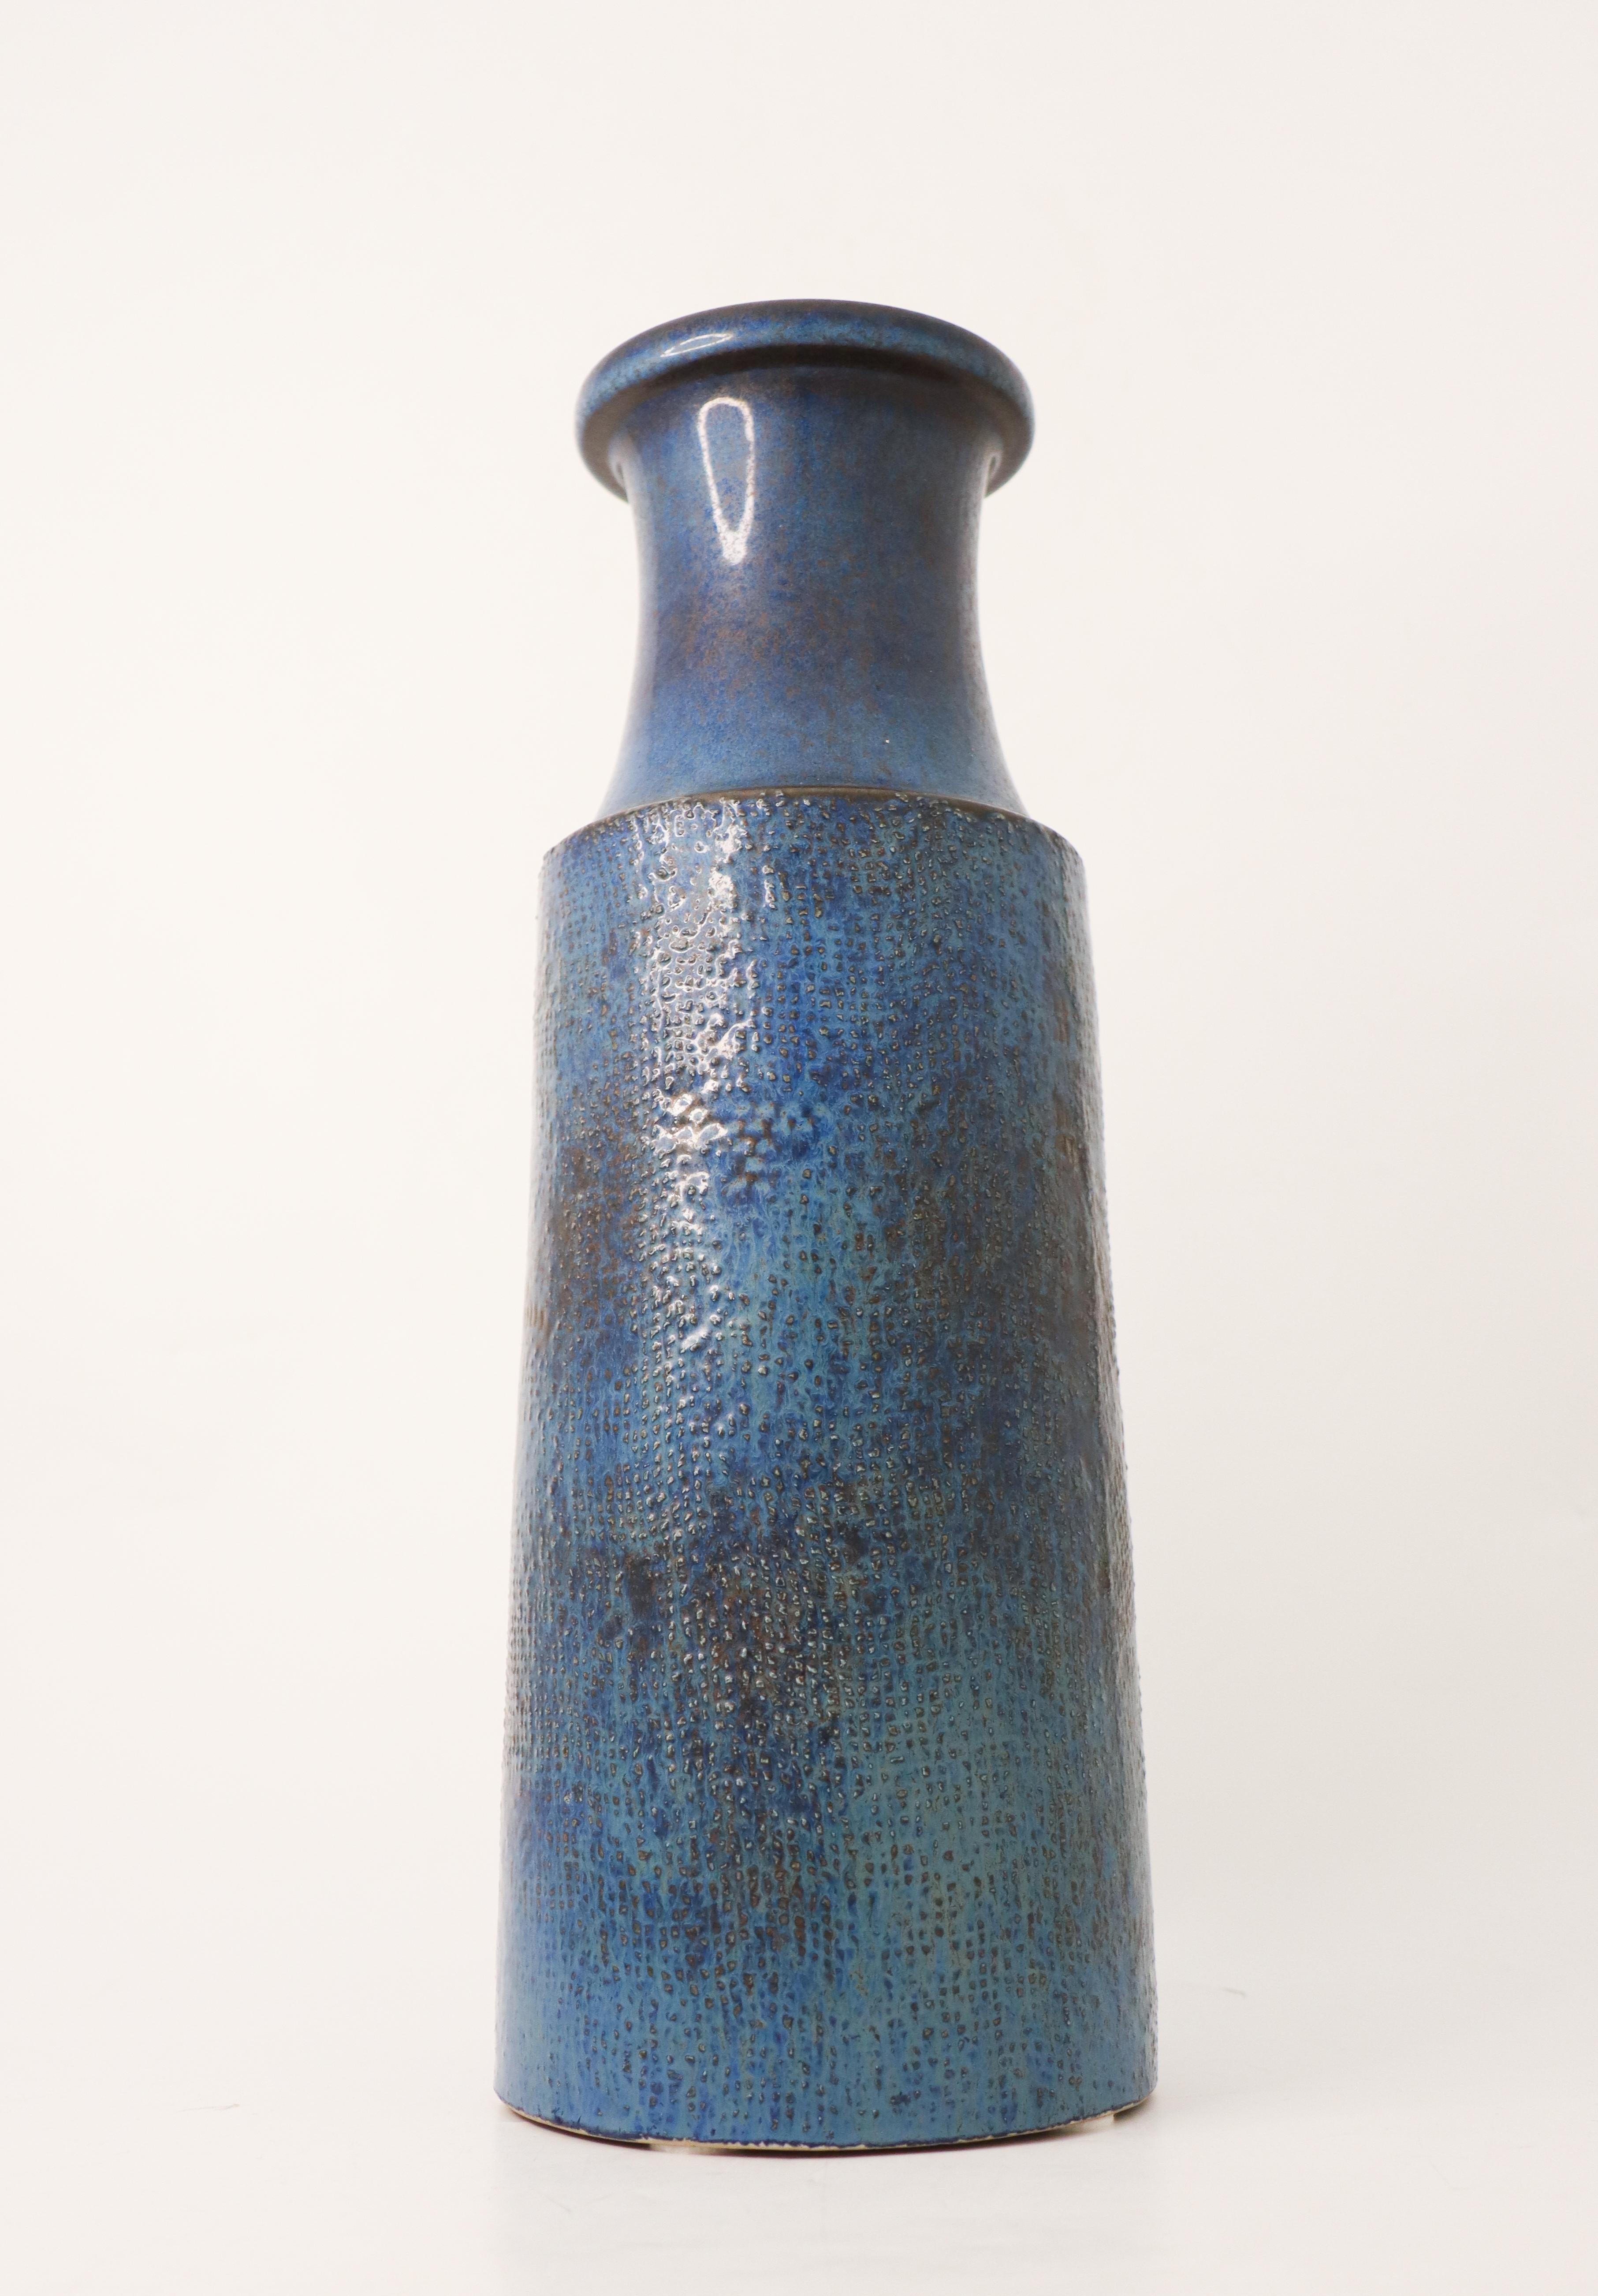 A large blue stoneware vase with a relief decor designed by Stig Lindberg at Gustavsberg. It is 39 cm high and in very good condition. This vase was designed in 1964.